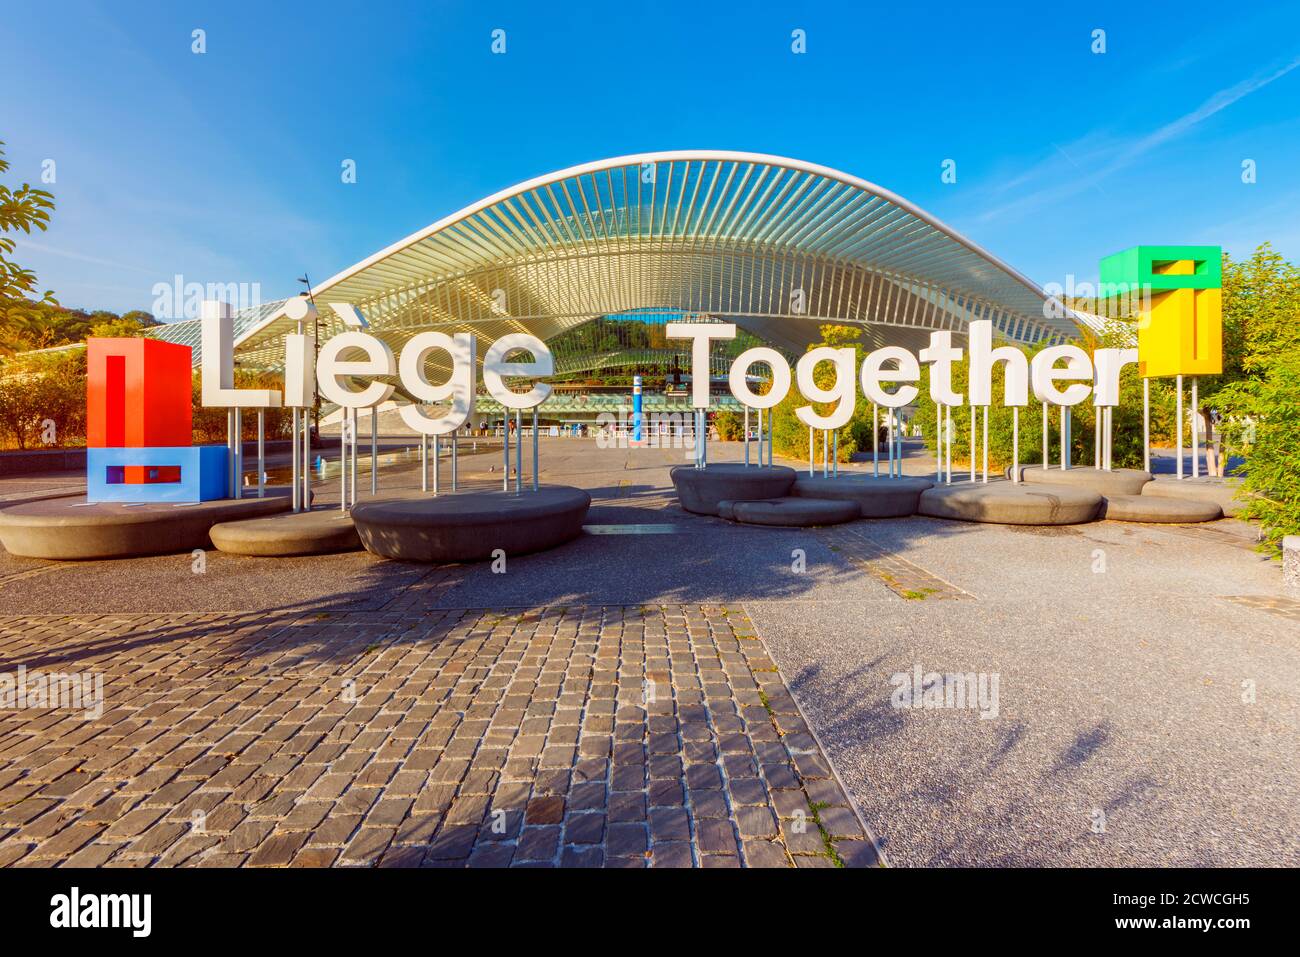 Liège Together letters in front of the Liège-Guillemins railway station. Liège Together is the city's promotional tagline. Stock Photo